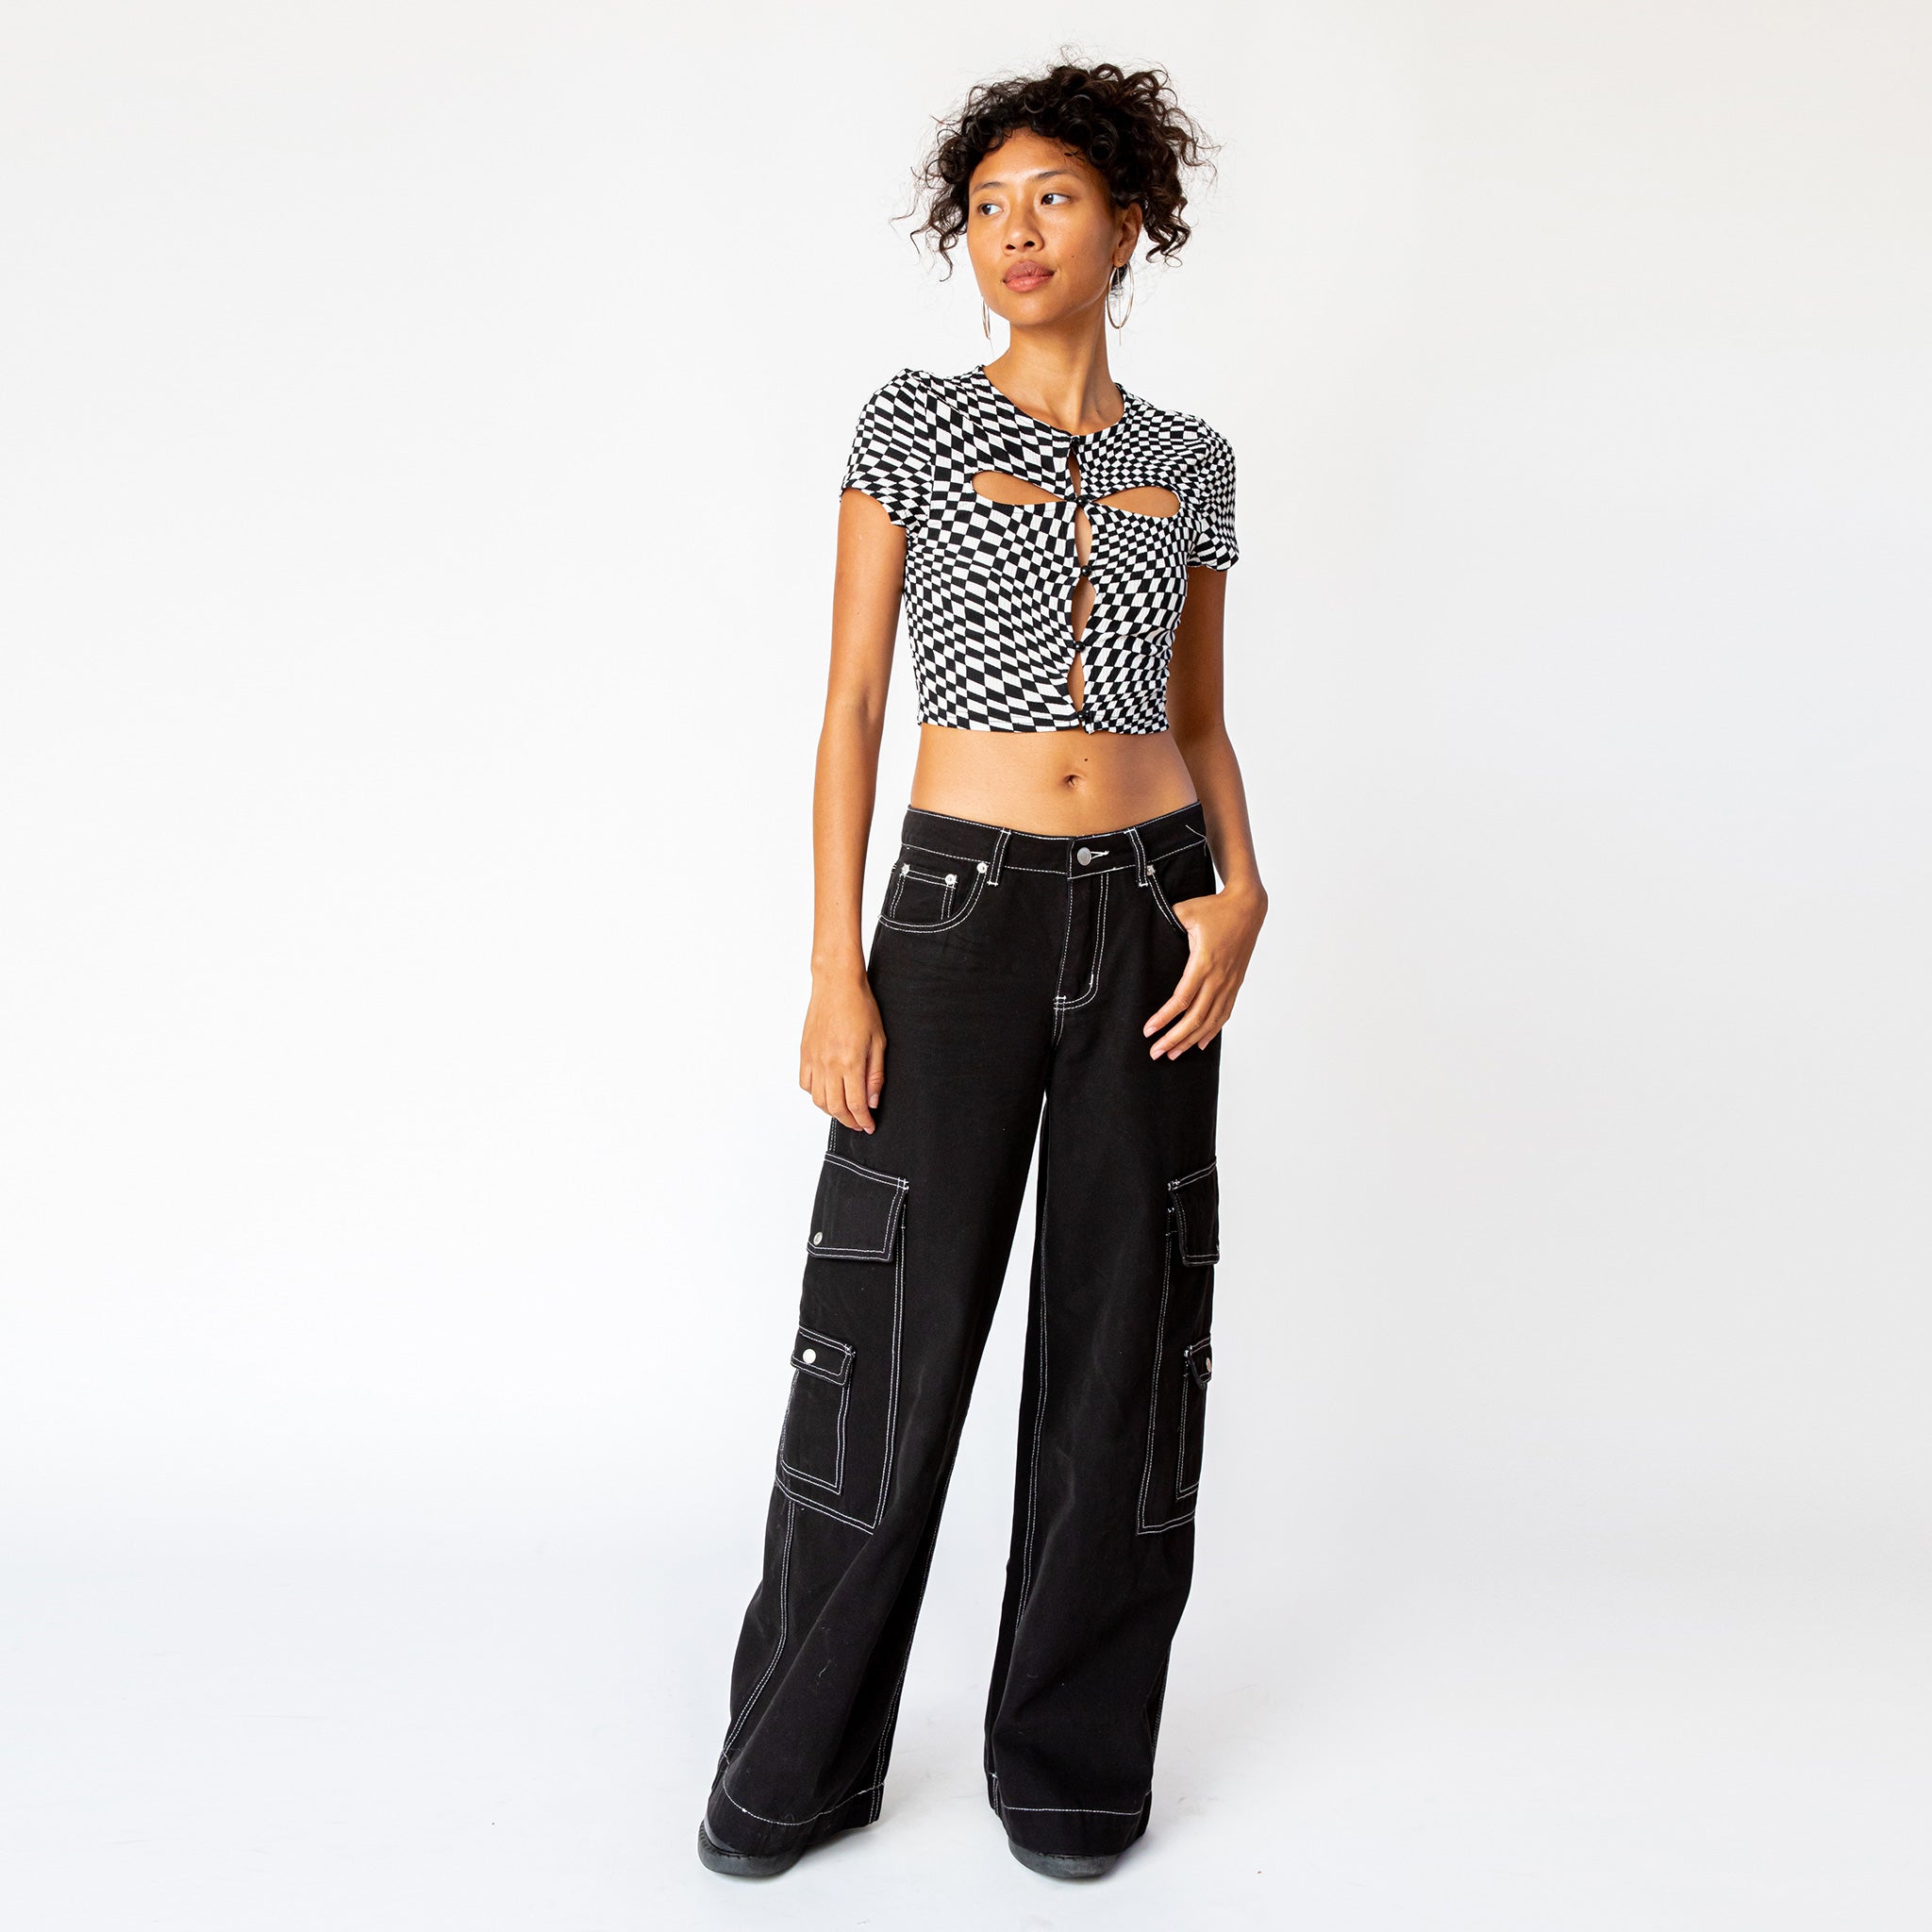 A model wears the black and white checkered cut out tee by Misc Etc, paired with black cargo pants - full outfit view.